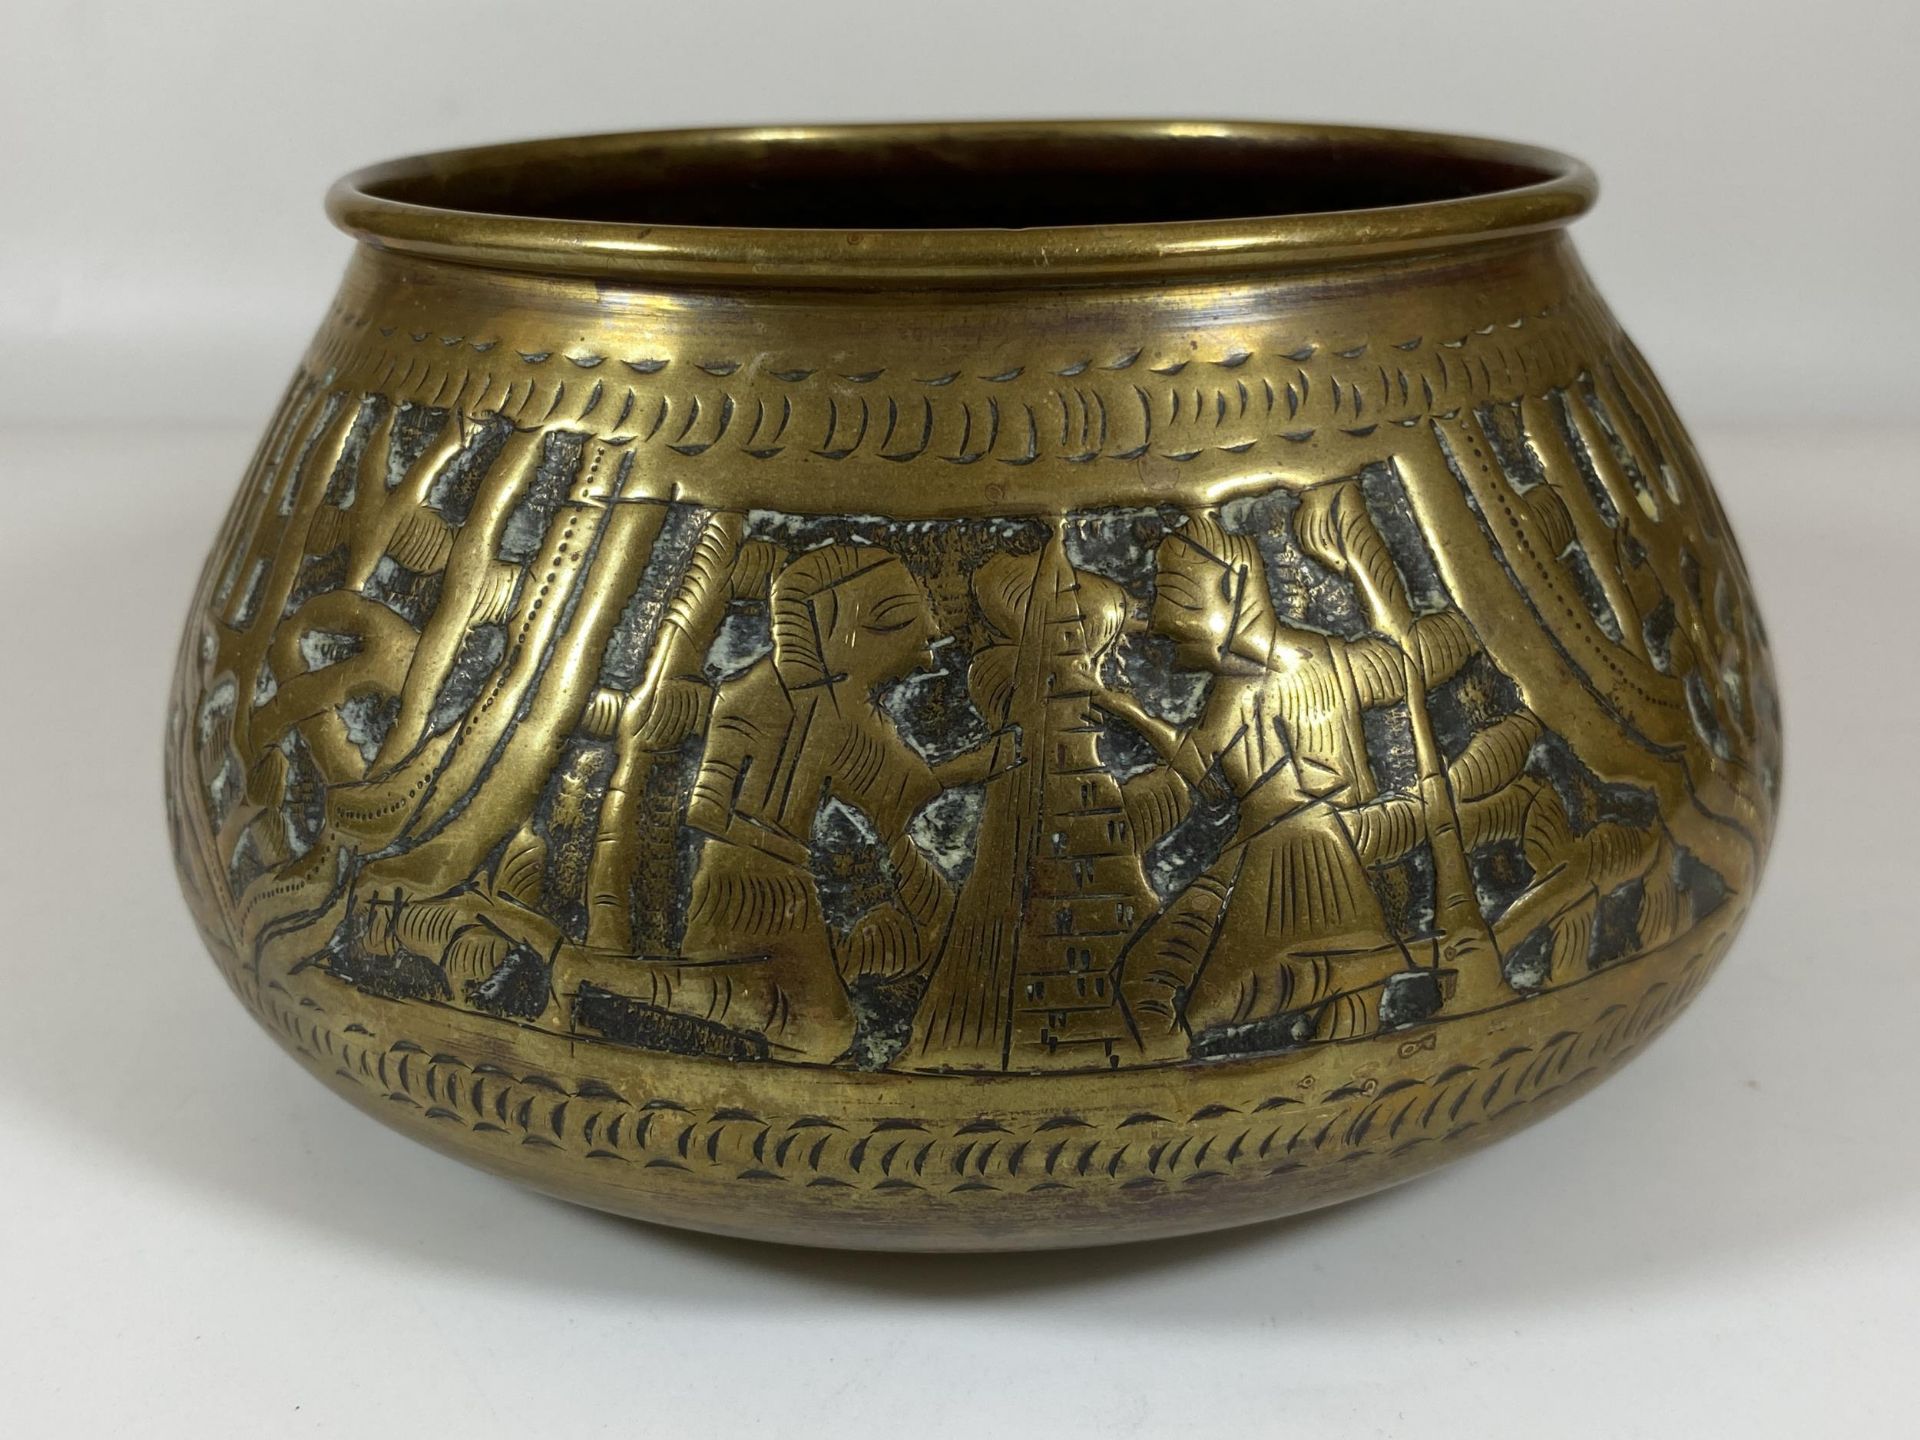 A VINTAGE MIDDLE EASTERN BRASS BOWL WITH FIGURES AND ANIMAL DESIGN, HEIGHT 10CM